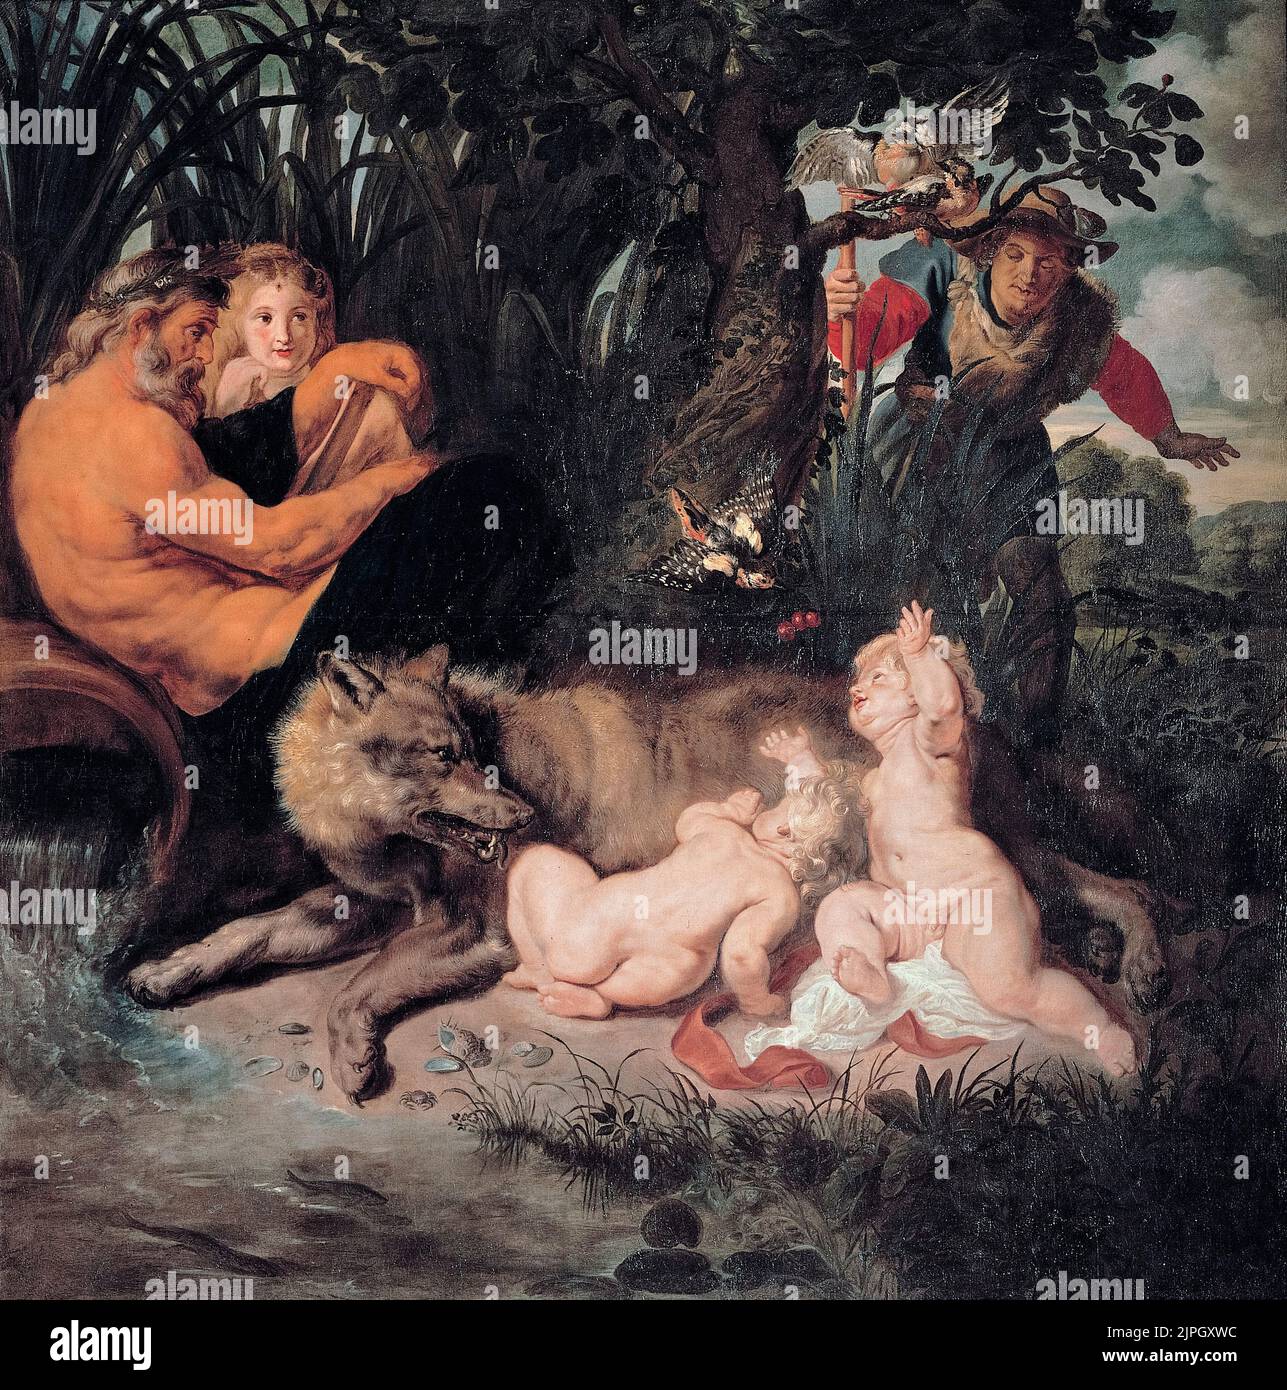 Peter Paul Rubens, Romulus and Remus, painting in oil on canvas, 1615-1616 Stock Photo